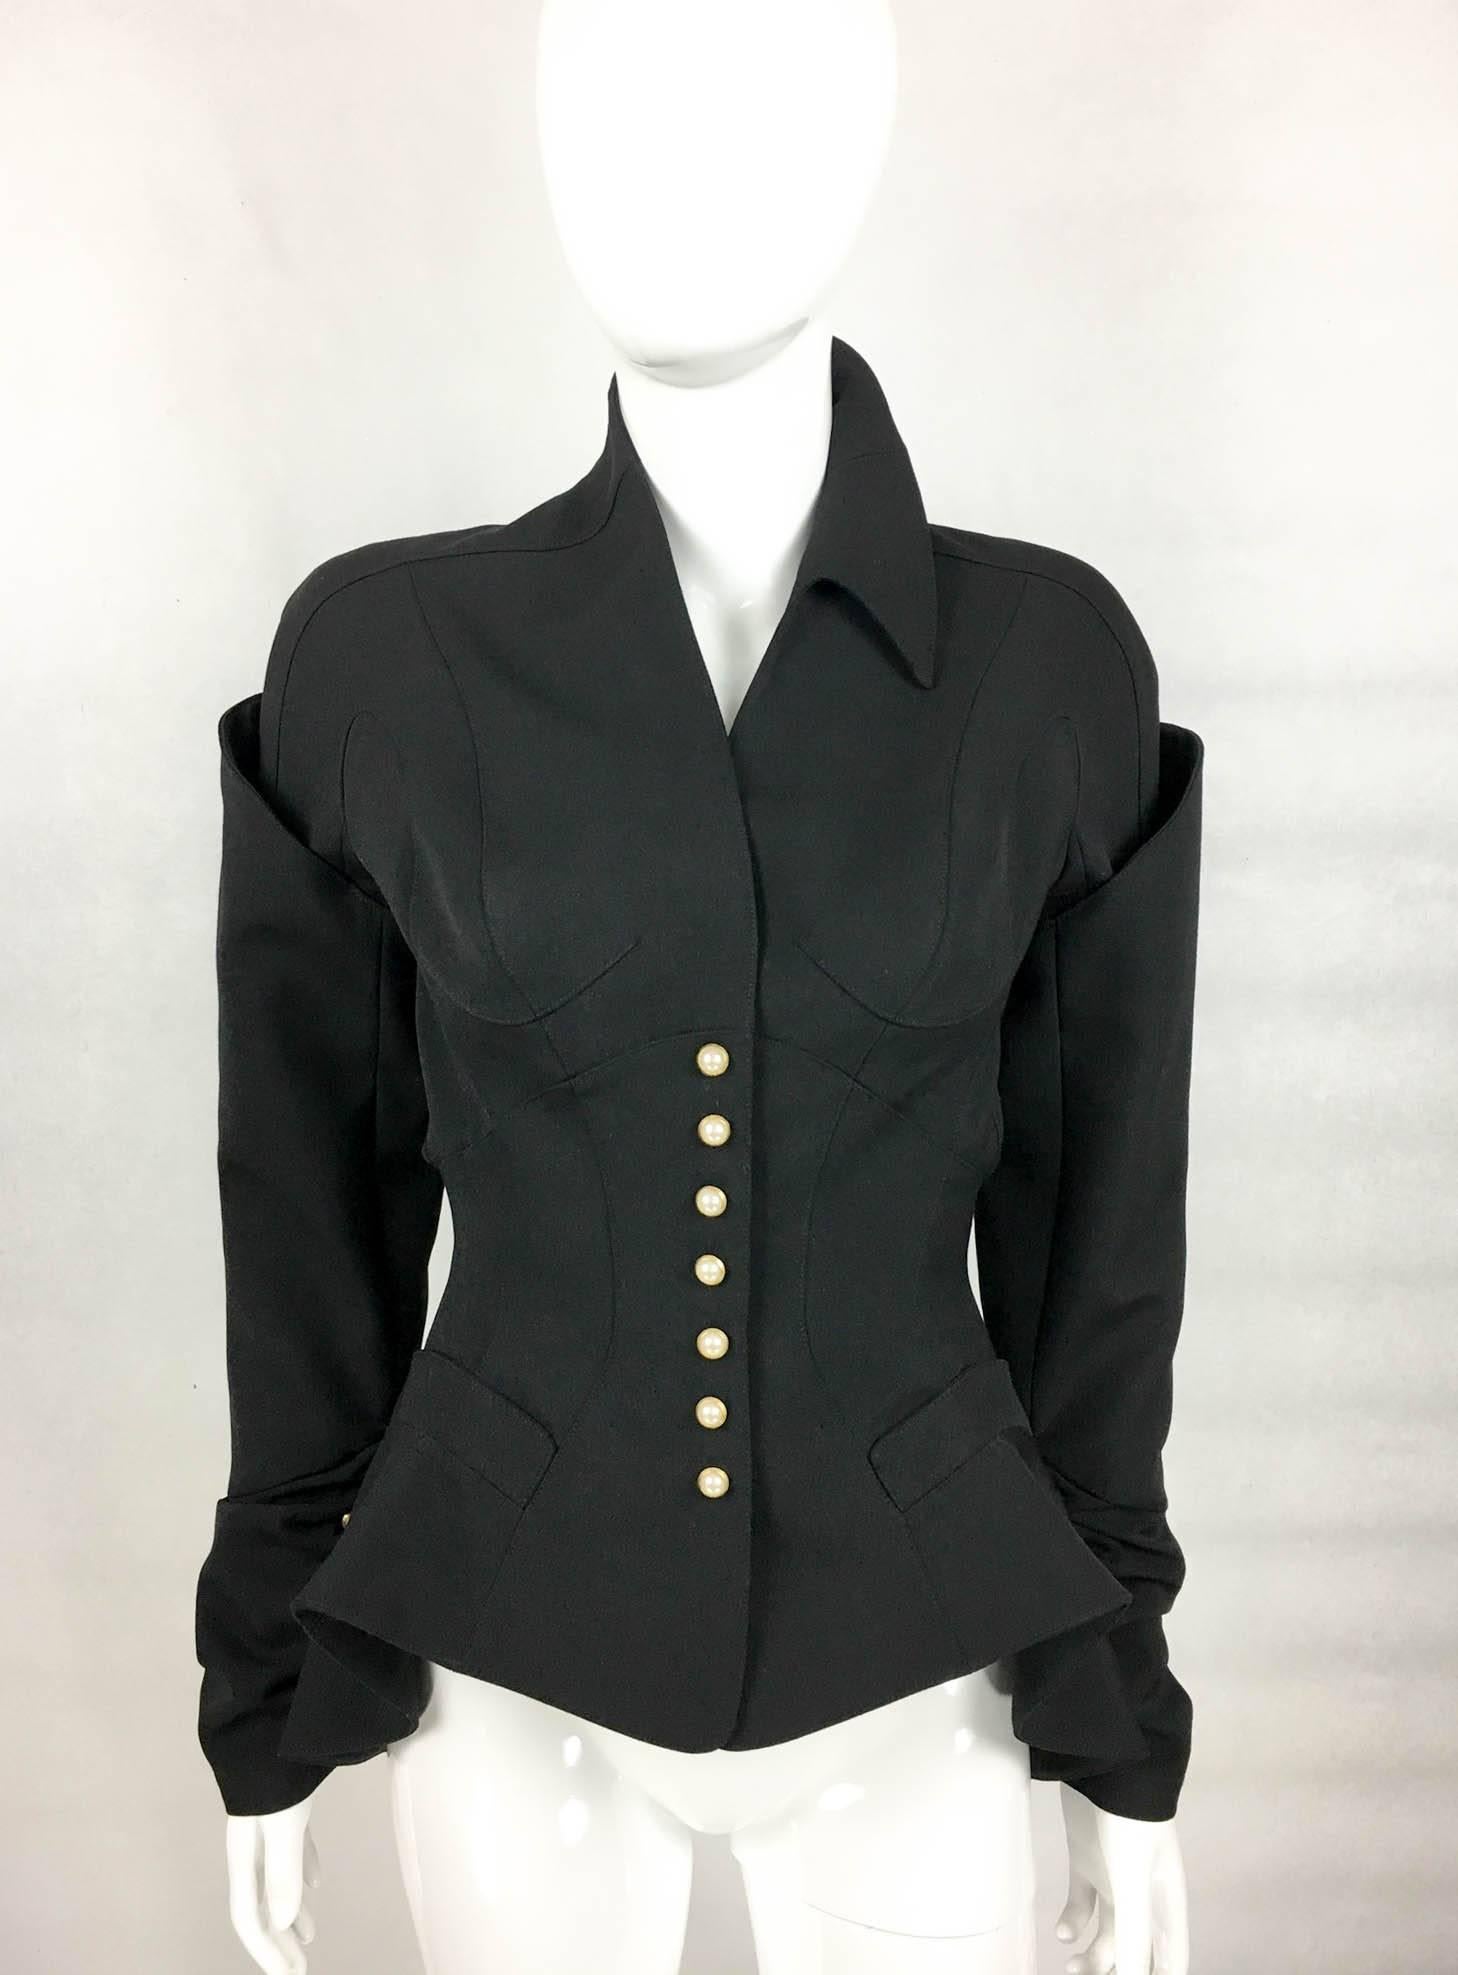 Thierry Mugler Architectural Black Wool Jacket (Runway Look) - Circa 1995 In Excellent Condition In London, Chelsea